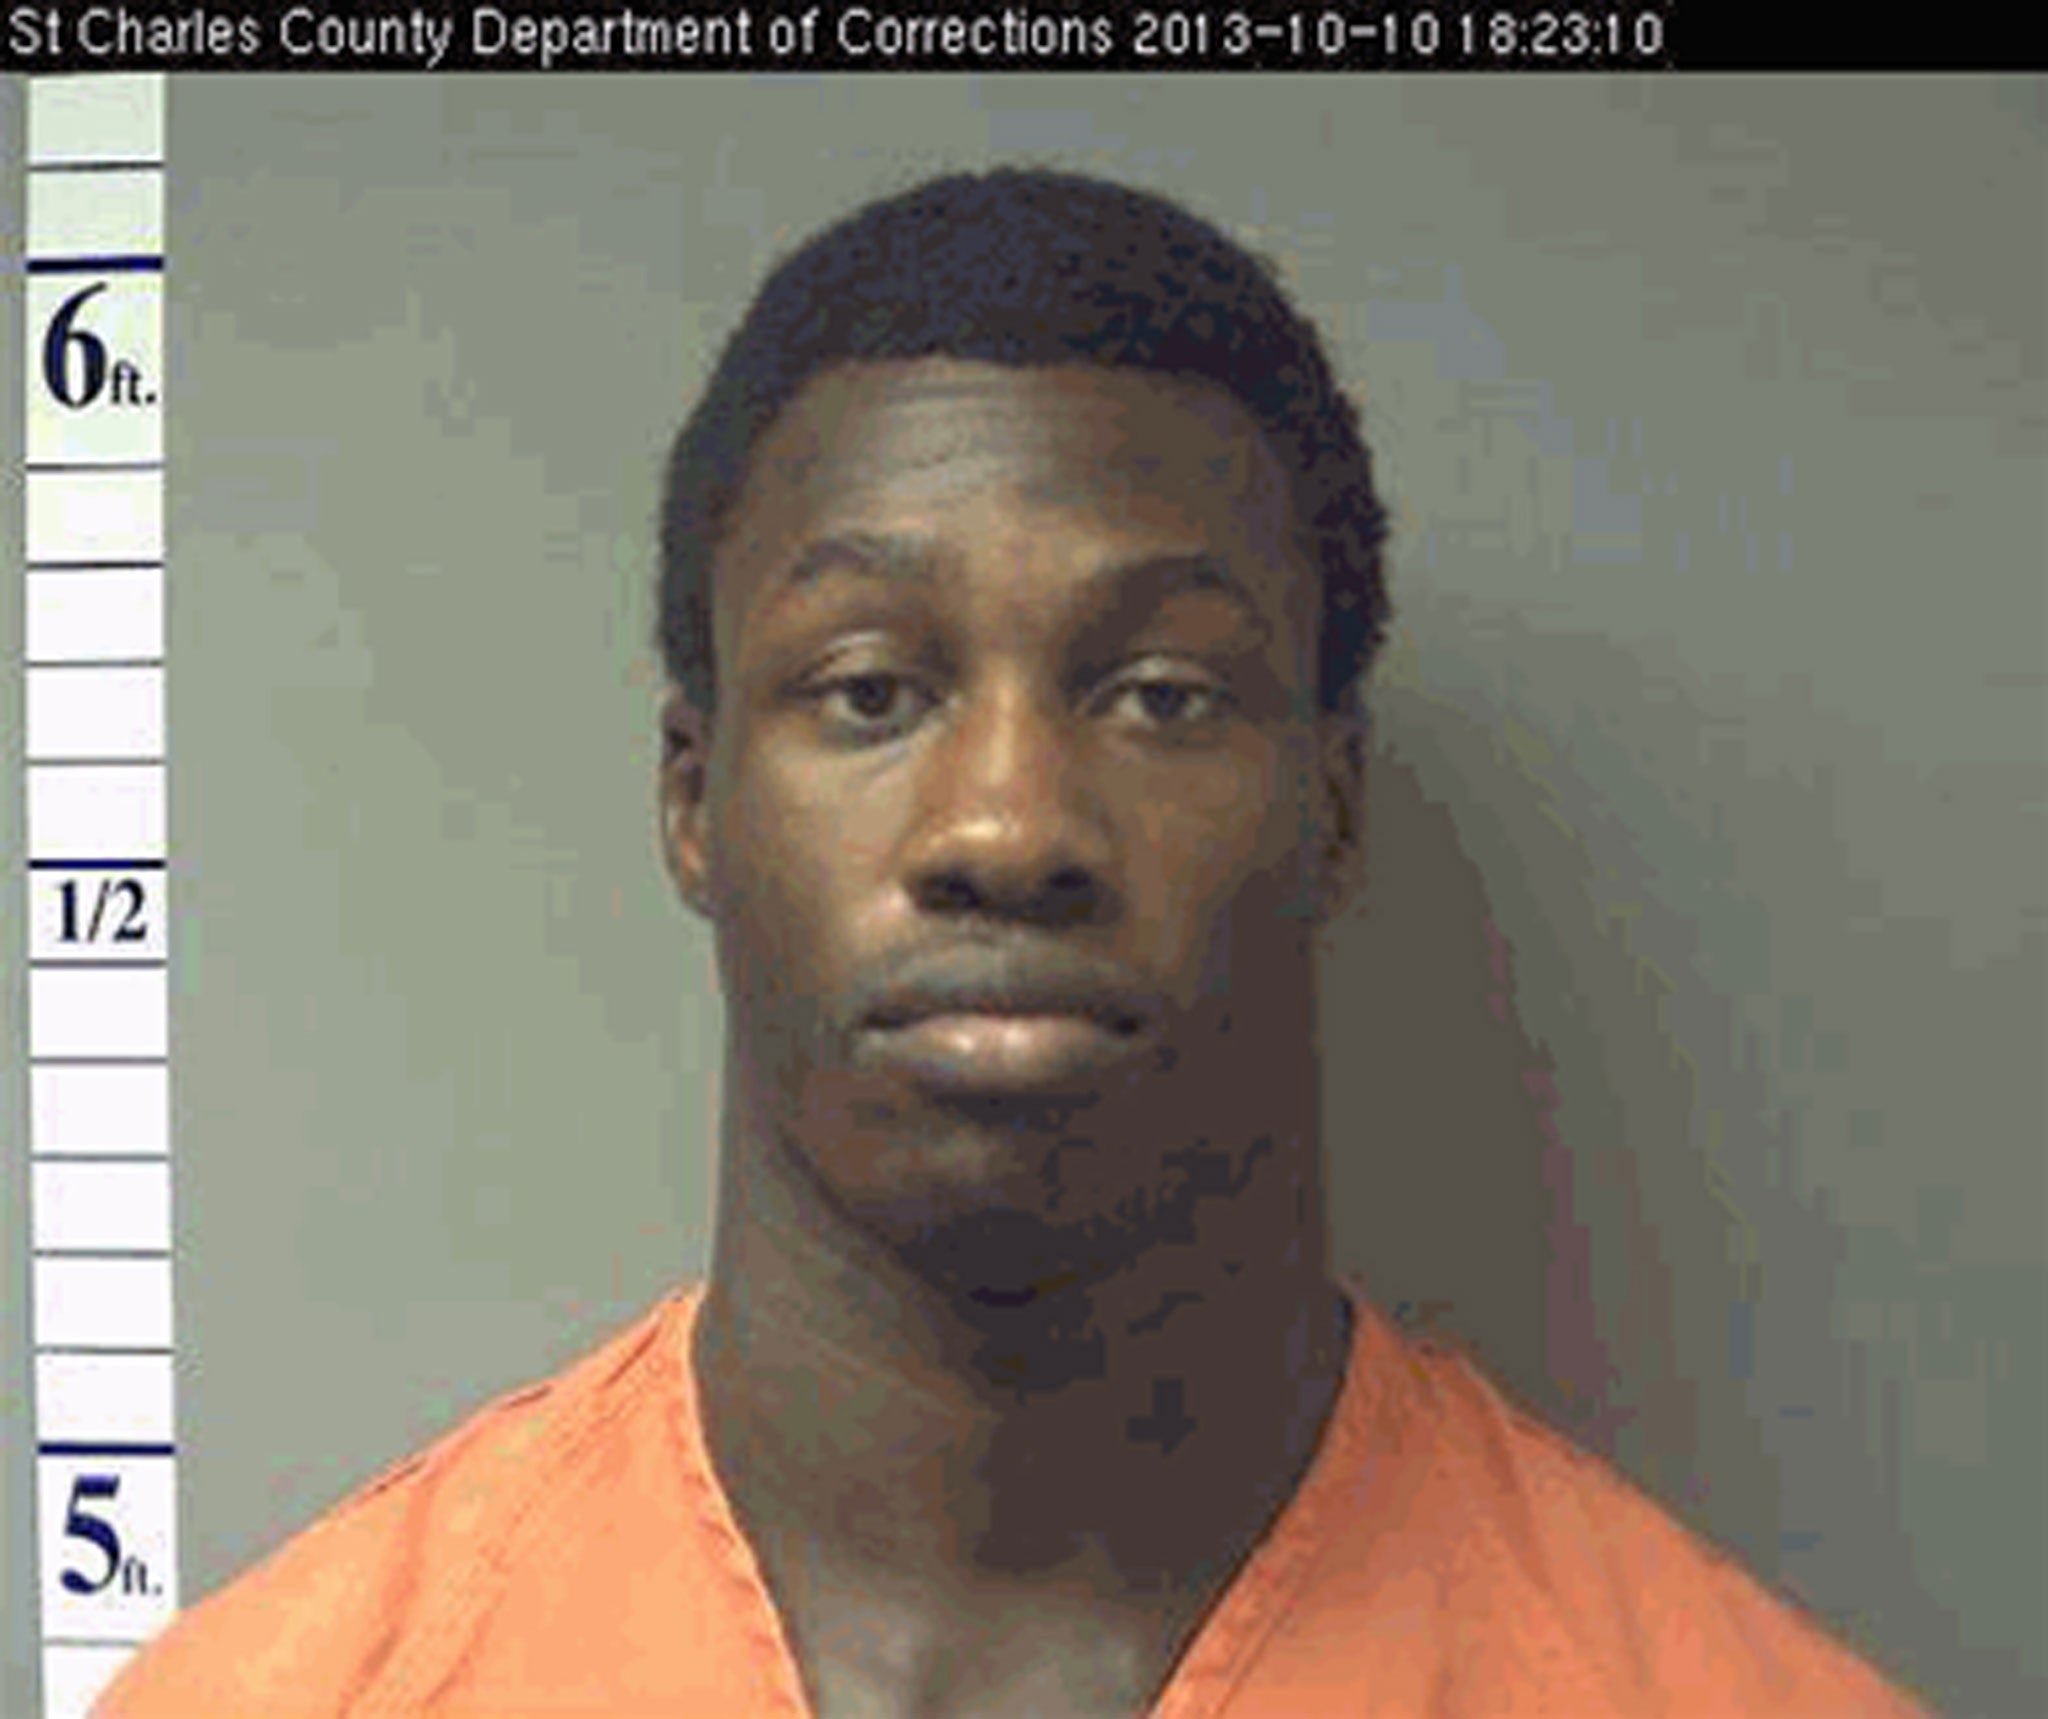 Michael L. Johnson, who faces felony HIV exposure charges